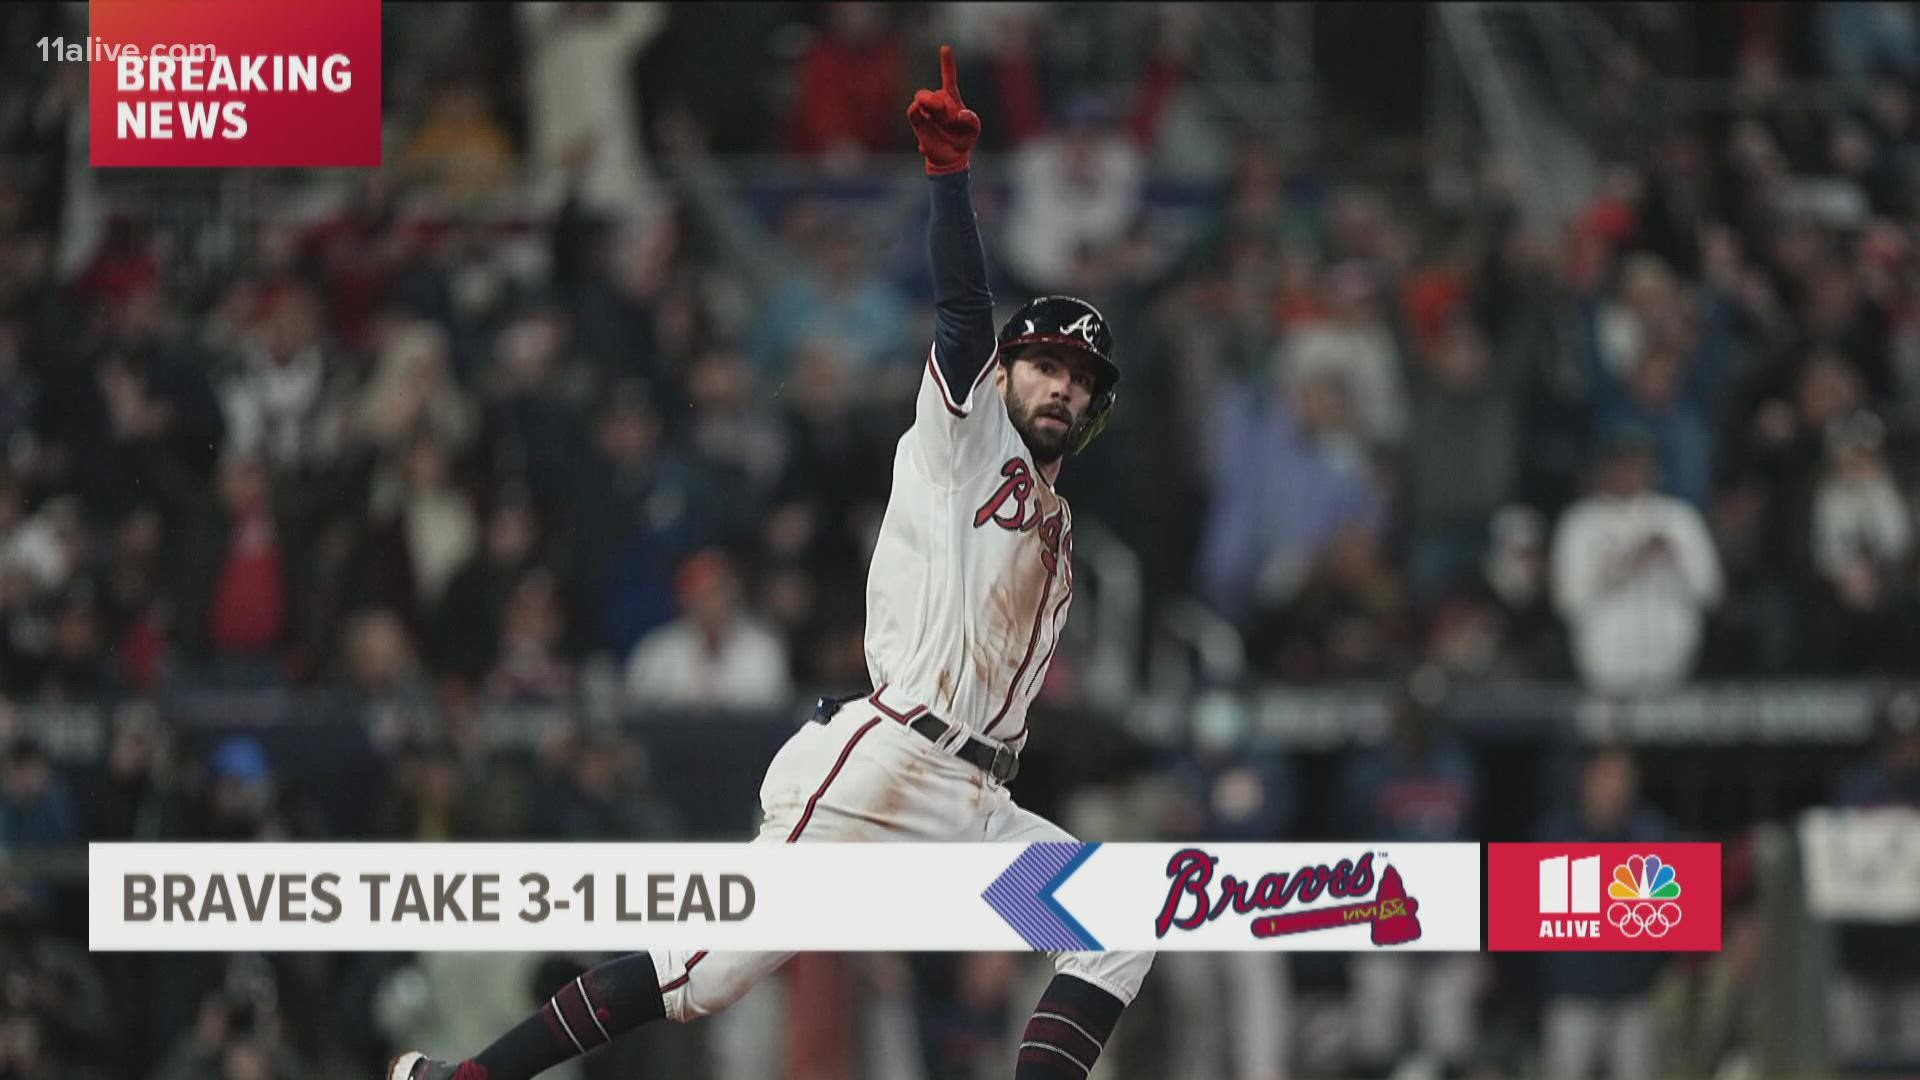 Game Four of the 2021 World Series took place on Saturday, October 30. Here is a breakdown of the action between the Atlanta Braves and the Houston Astros.